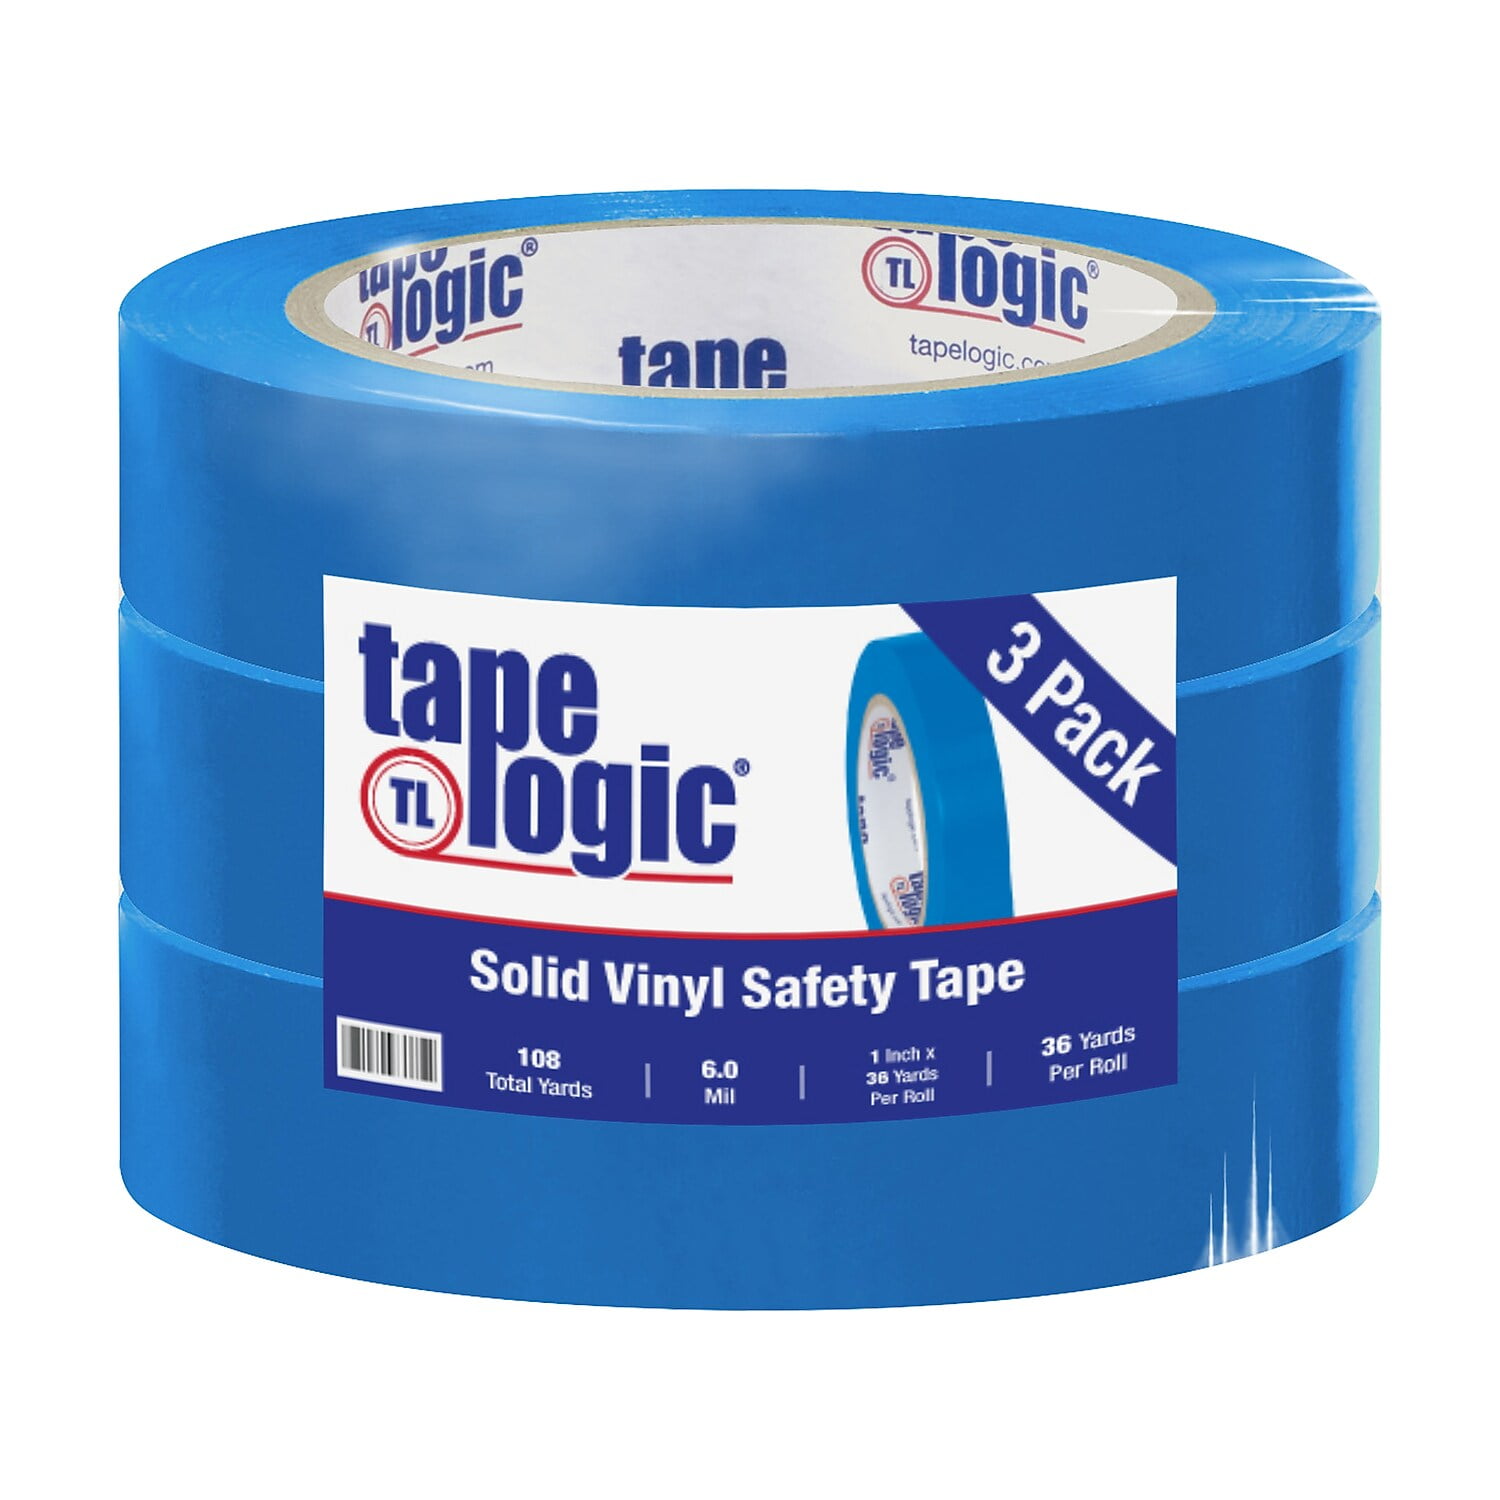 Tape Logic T91363pkb 1 In. X 36 Yards Blue Solid Vinyl Safety Tape - Pack Of 3